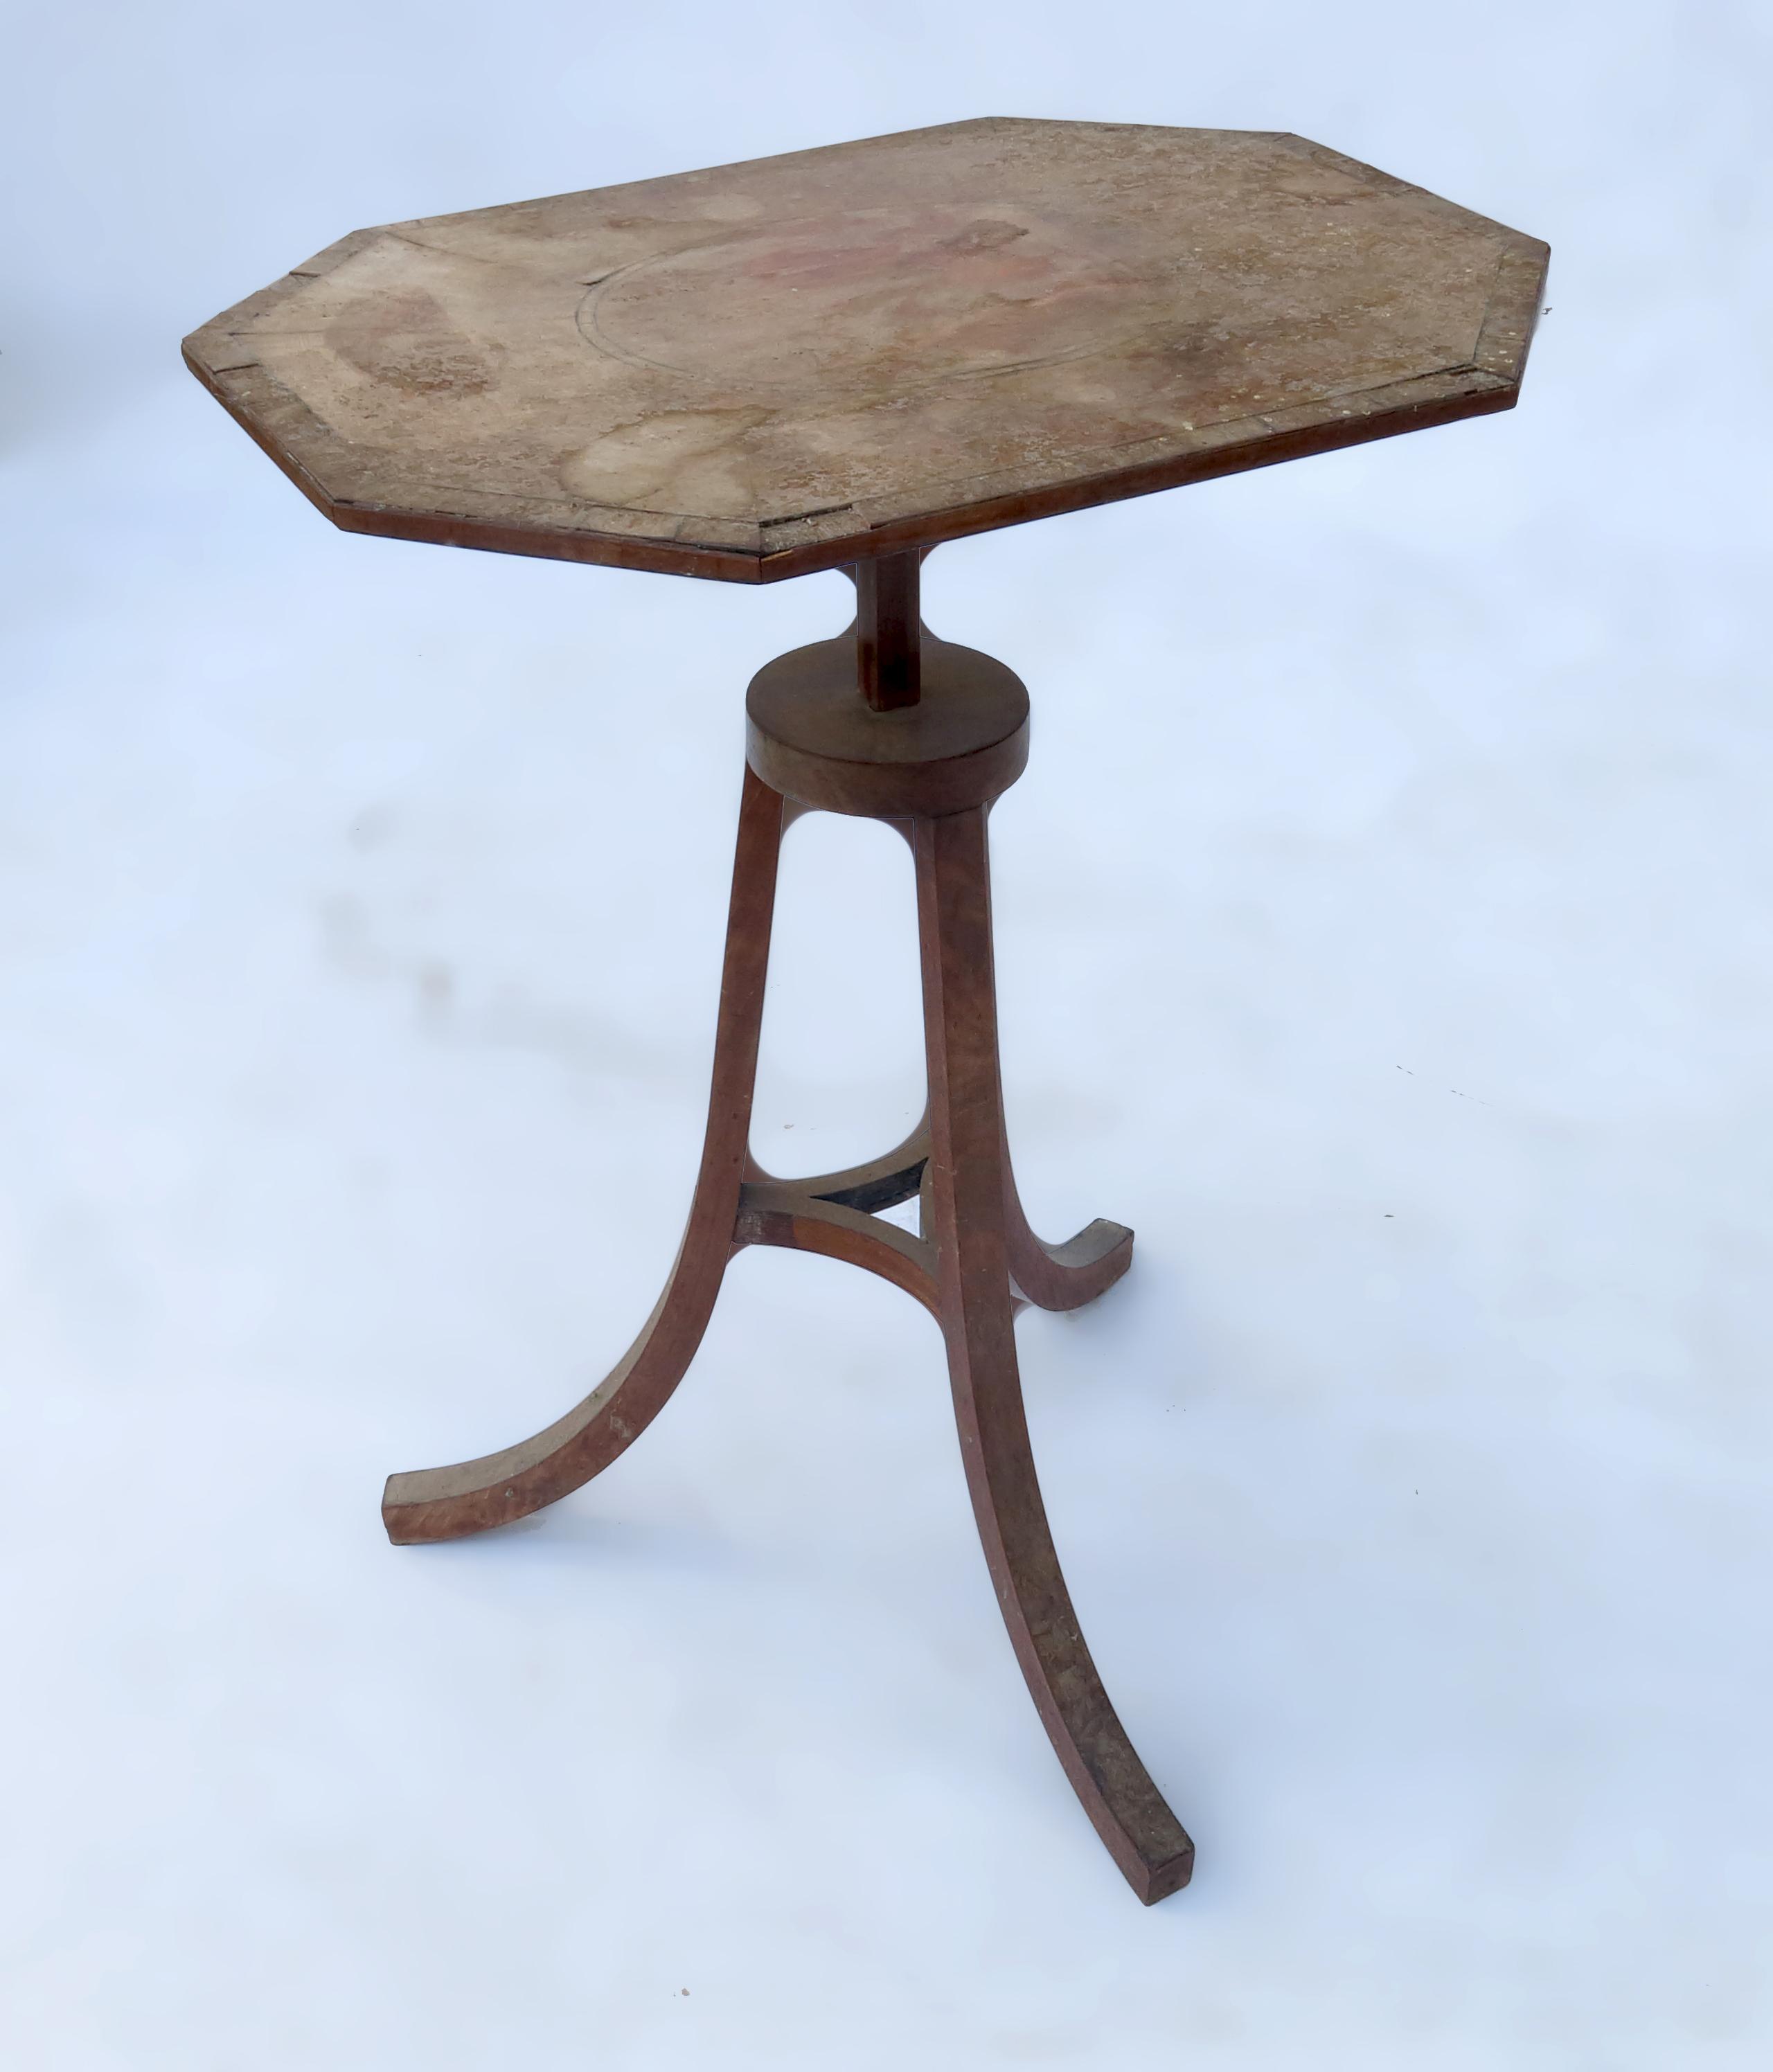 A unusual 18th century style octagonal shaped wine table, raised on a flare tripod base,